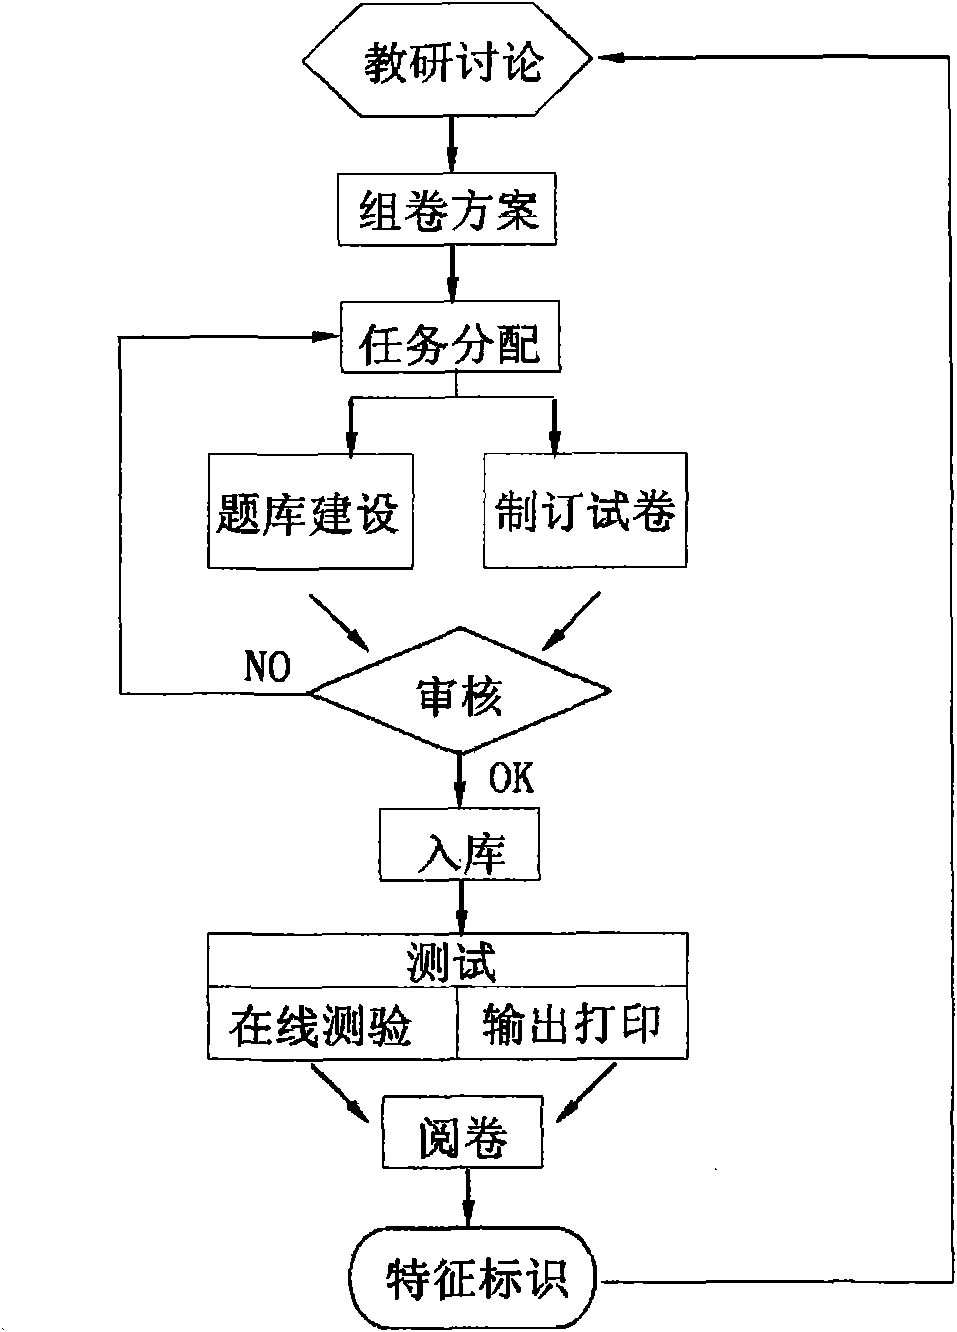 Cooperative question bank system and implementing method thereof